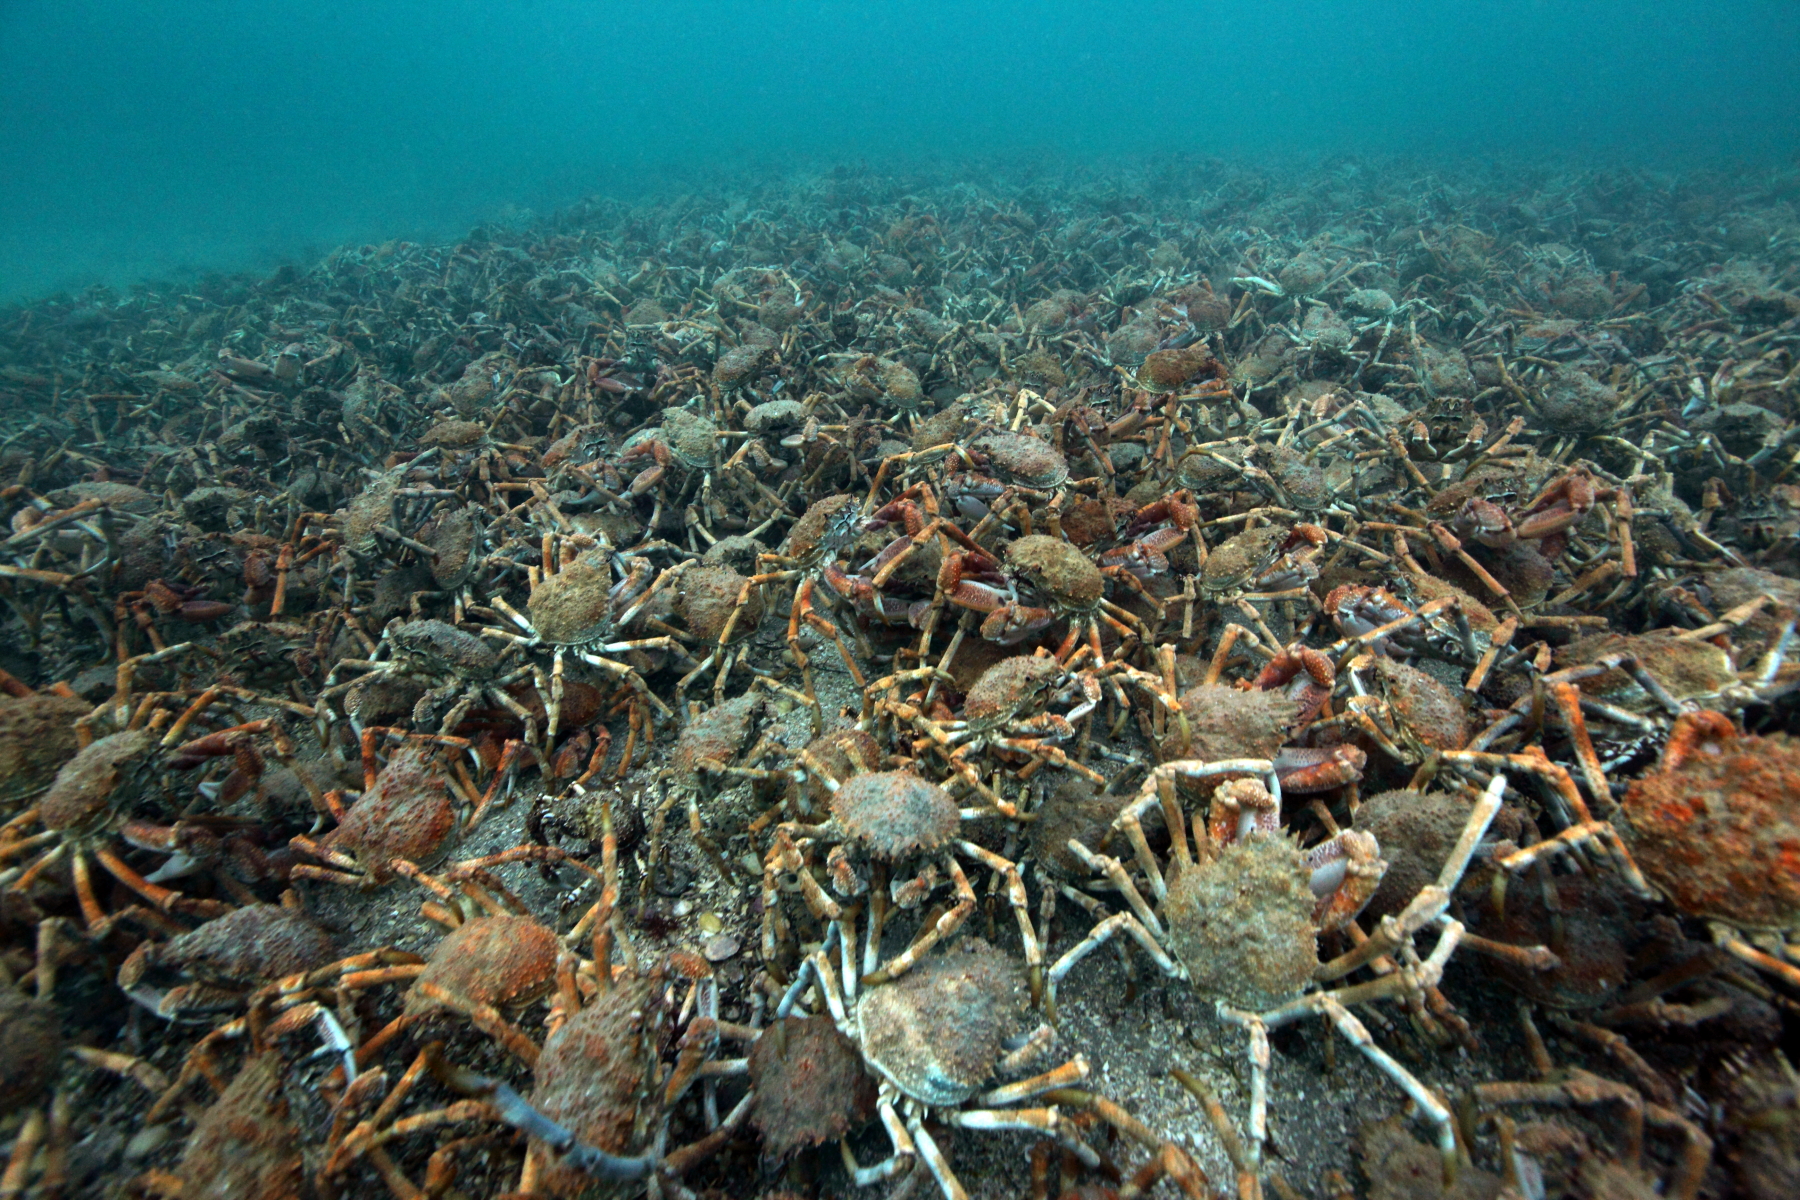 A cast of crabs. Spider crabs gather on mass in Port Phillip Bay to shed their old shells and develop a new exoskeletons. During the process the crabs are particularly vulnerable to predation as their new shells harden so they adopt the age old approach of safety in numbers. The spectacular event occurs annually, but the time of the year and location varies. This year the crabs migrated to the shallow waters of the southern Mornington Peninsula in late June and remained in the area for about a fortnight before dispersing.  